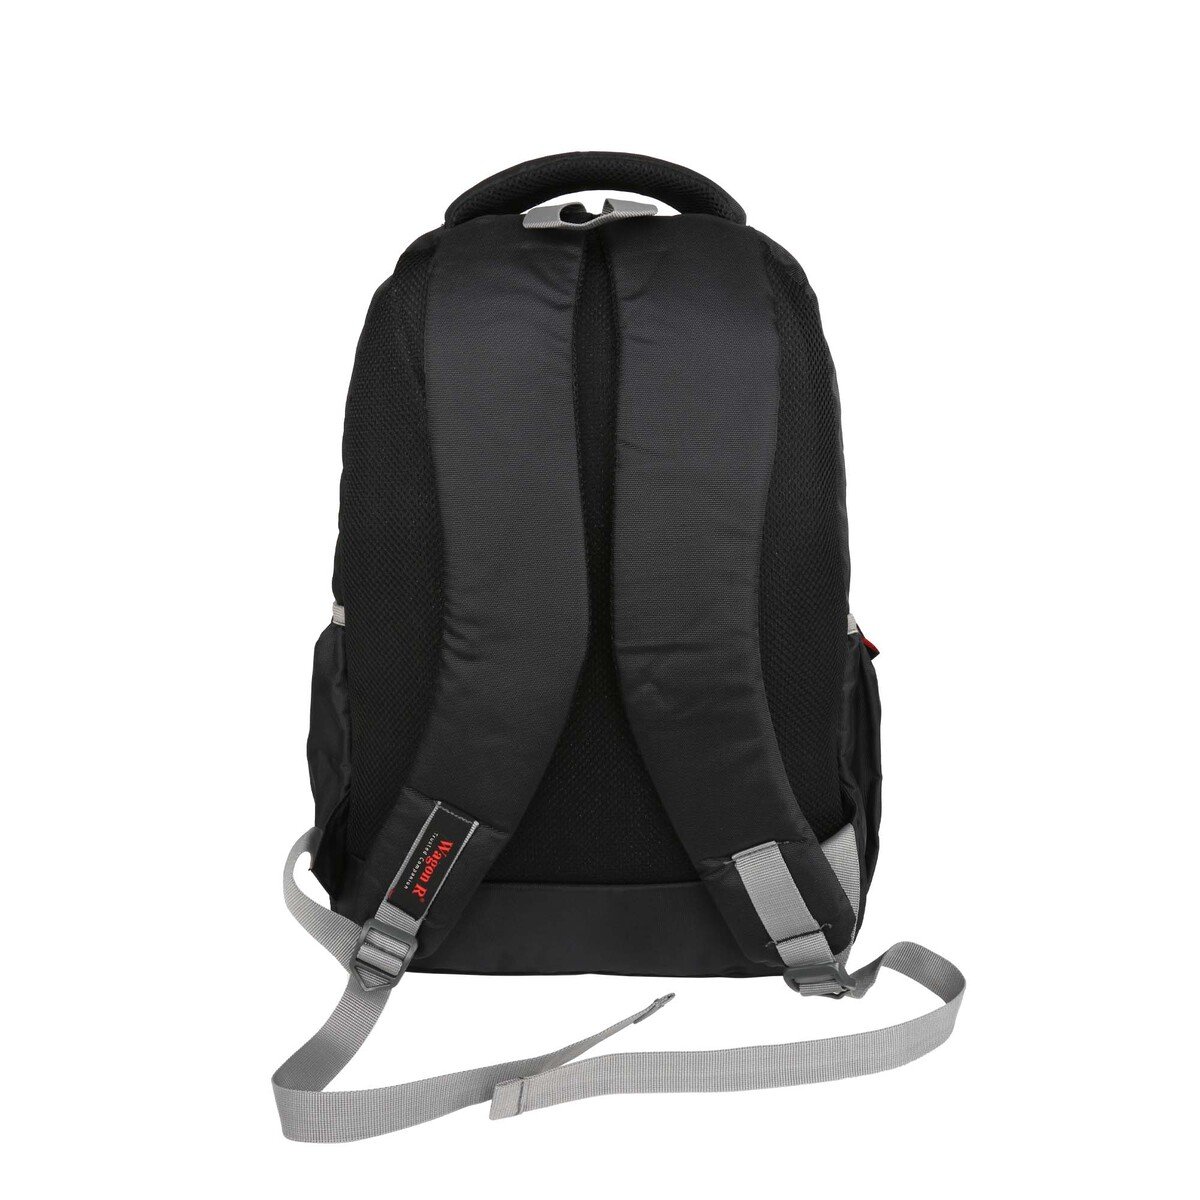 Wagon-R Jazzy Backpack BKP623 19 Inch